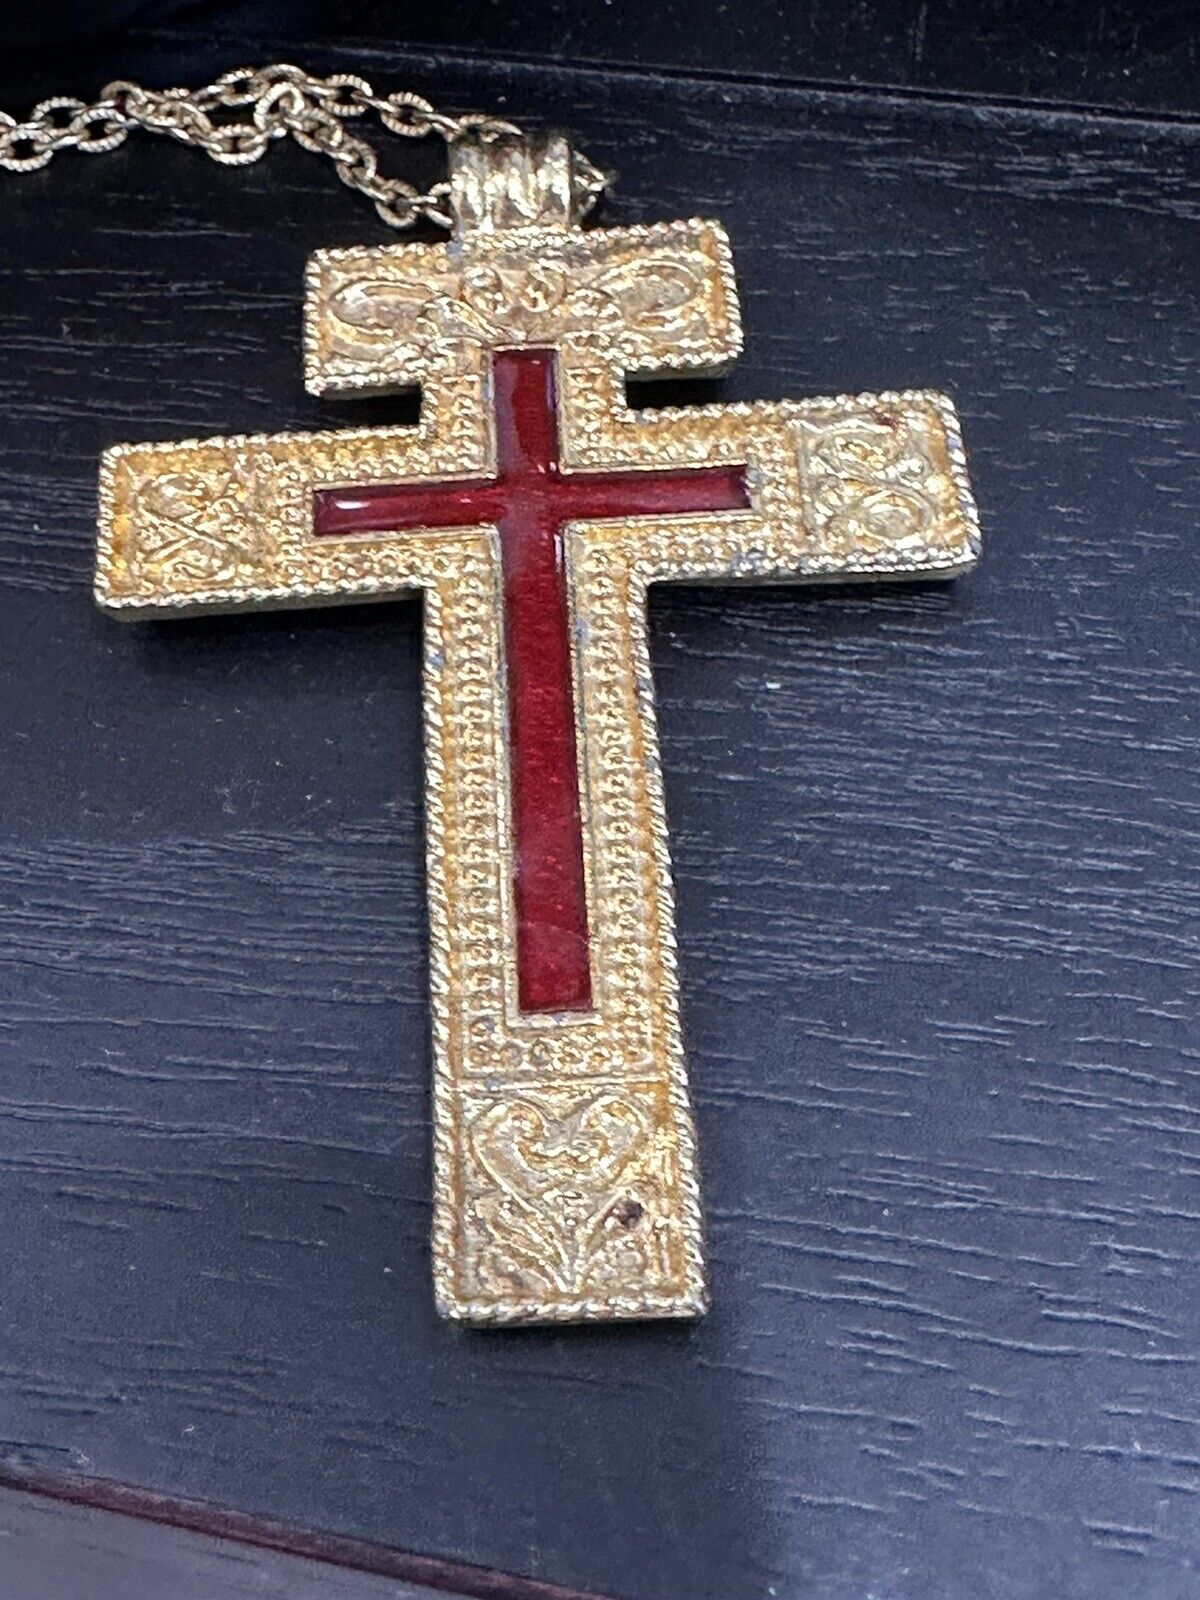 LARGE Pectoral Cross Necklace Bishops & Priests Gold Tone Red Pendant Necklace